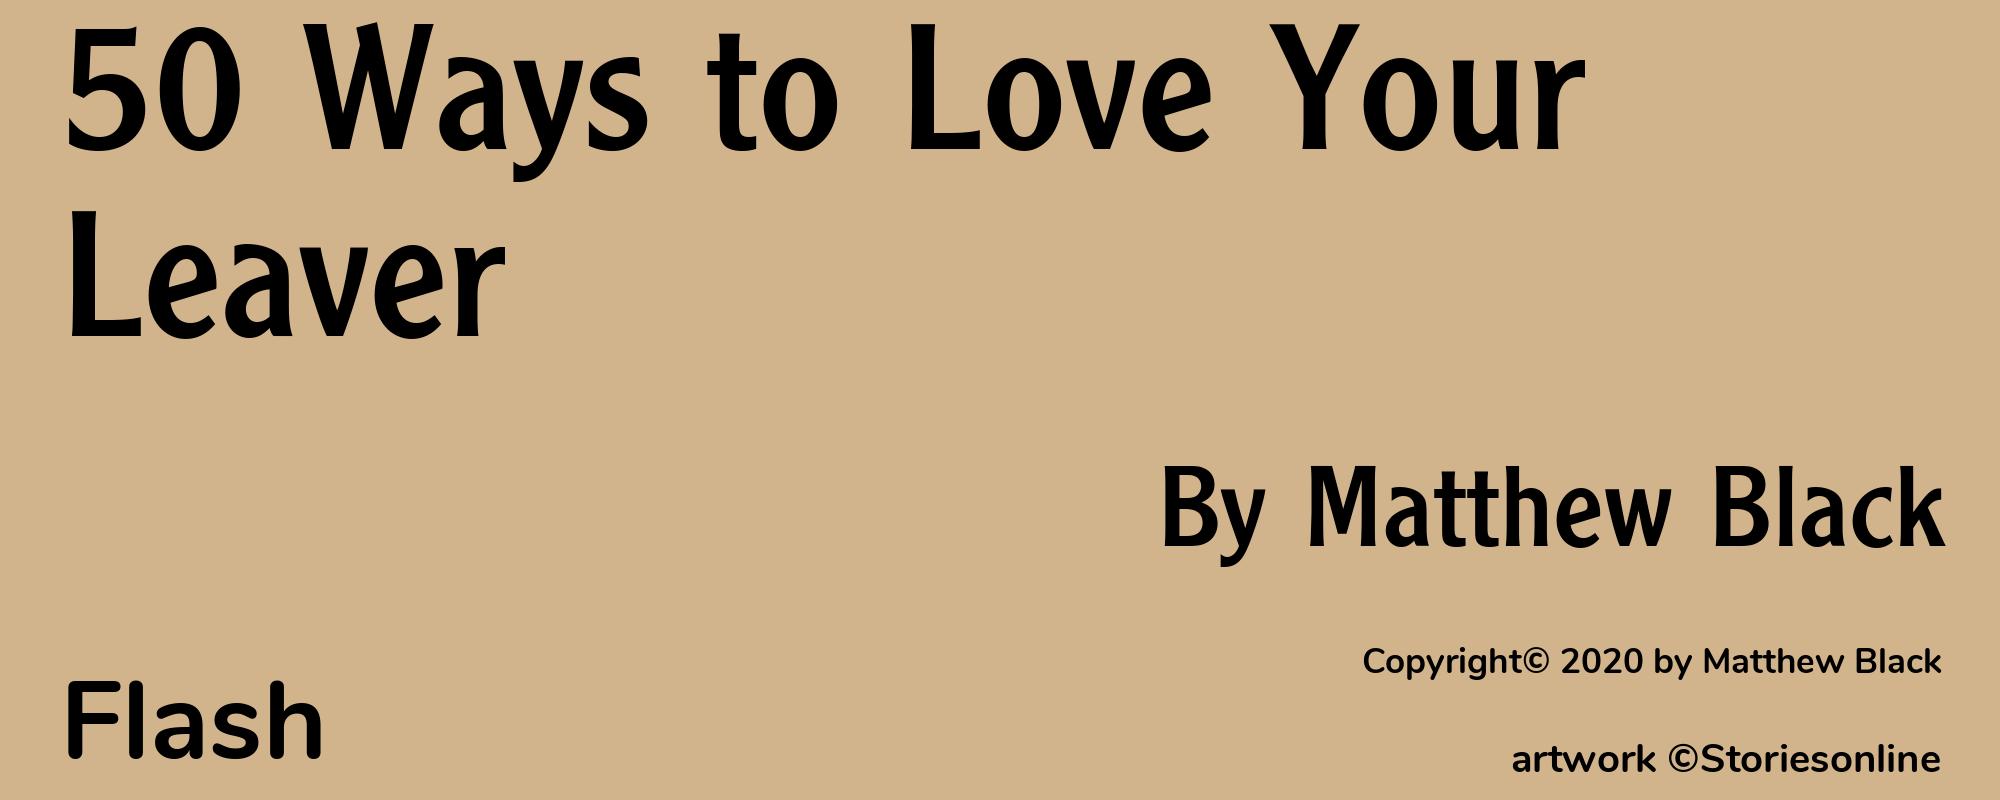 50 Ways to Love Your Leaver - Cover